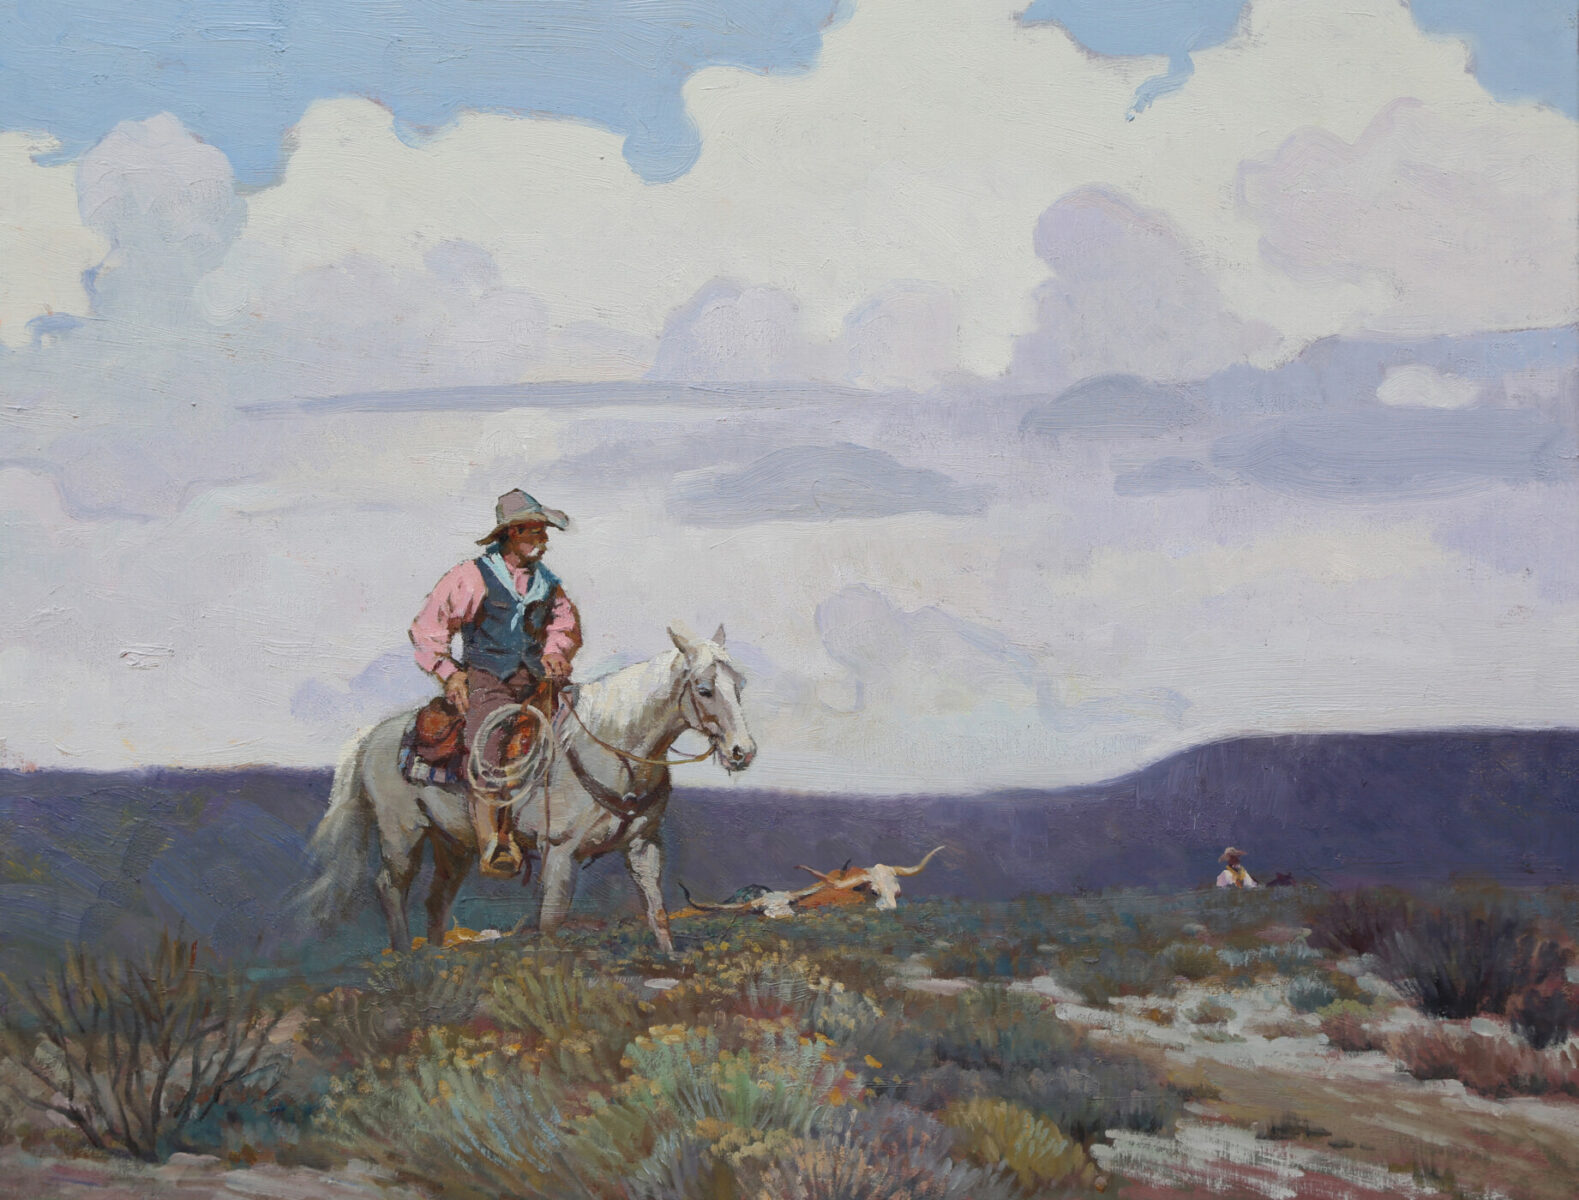 Western impressionist painting of cowboy on hilltop by Xiang Zhang